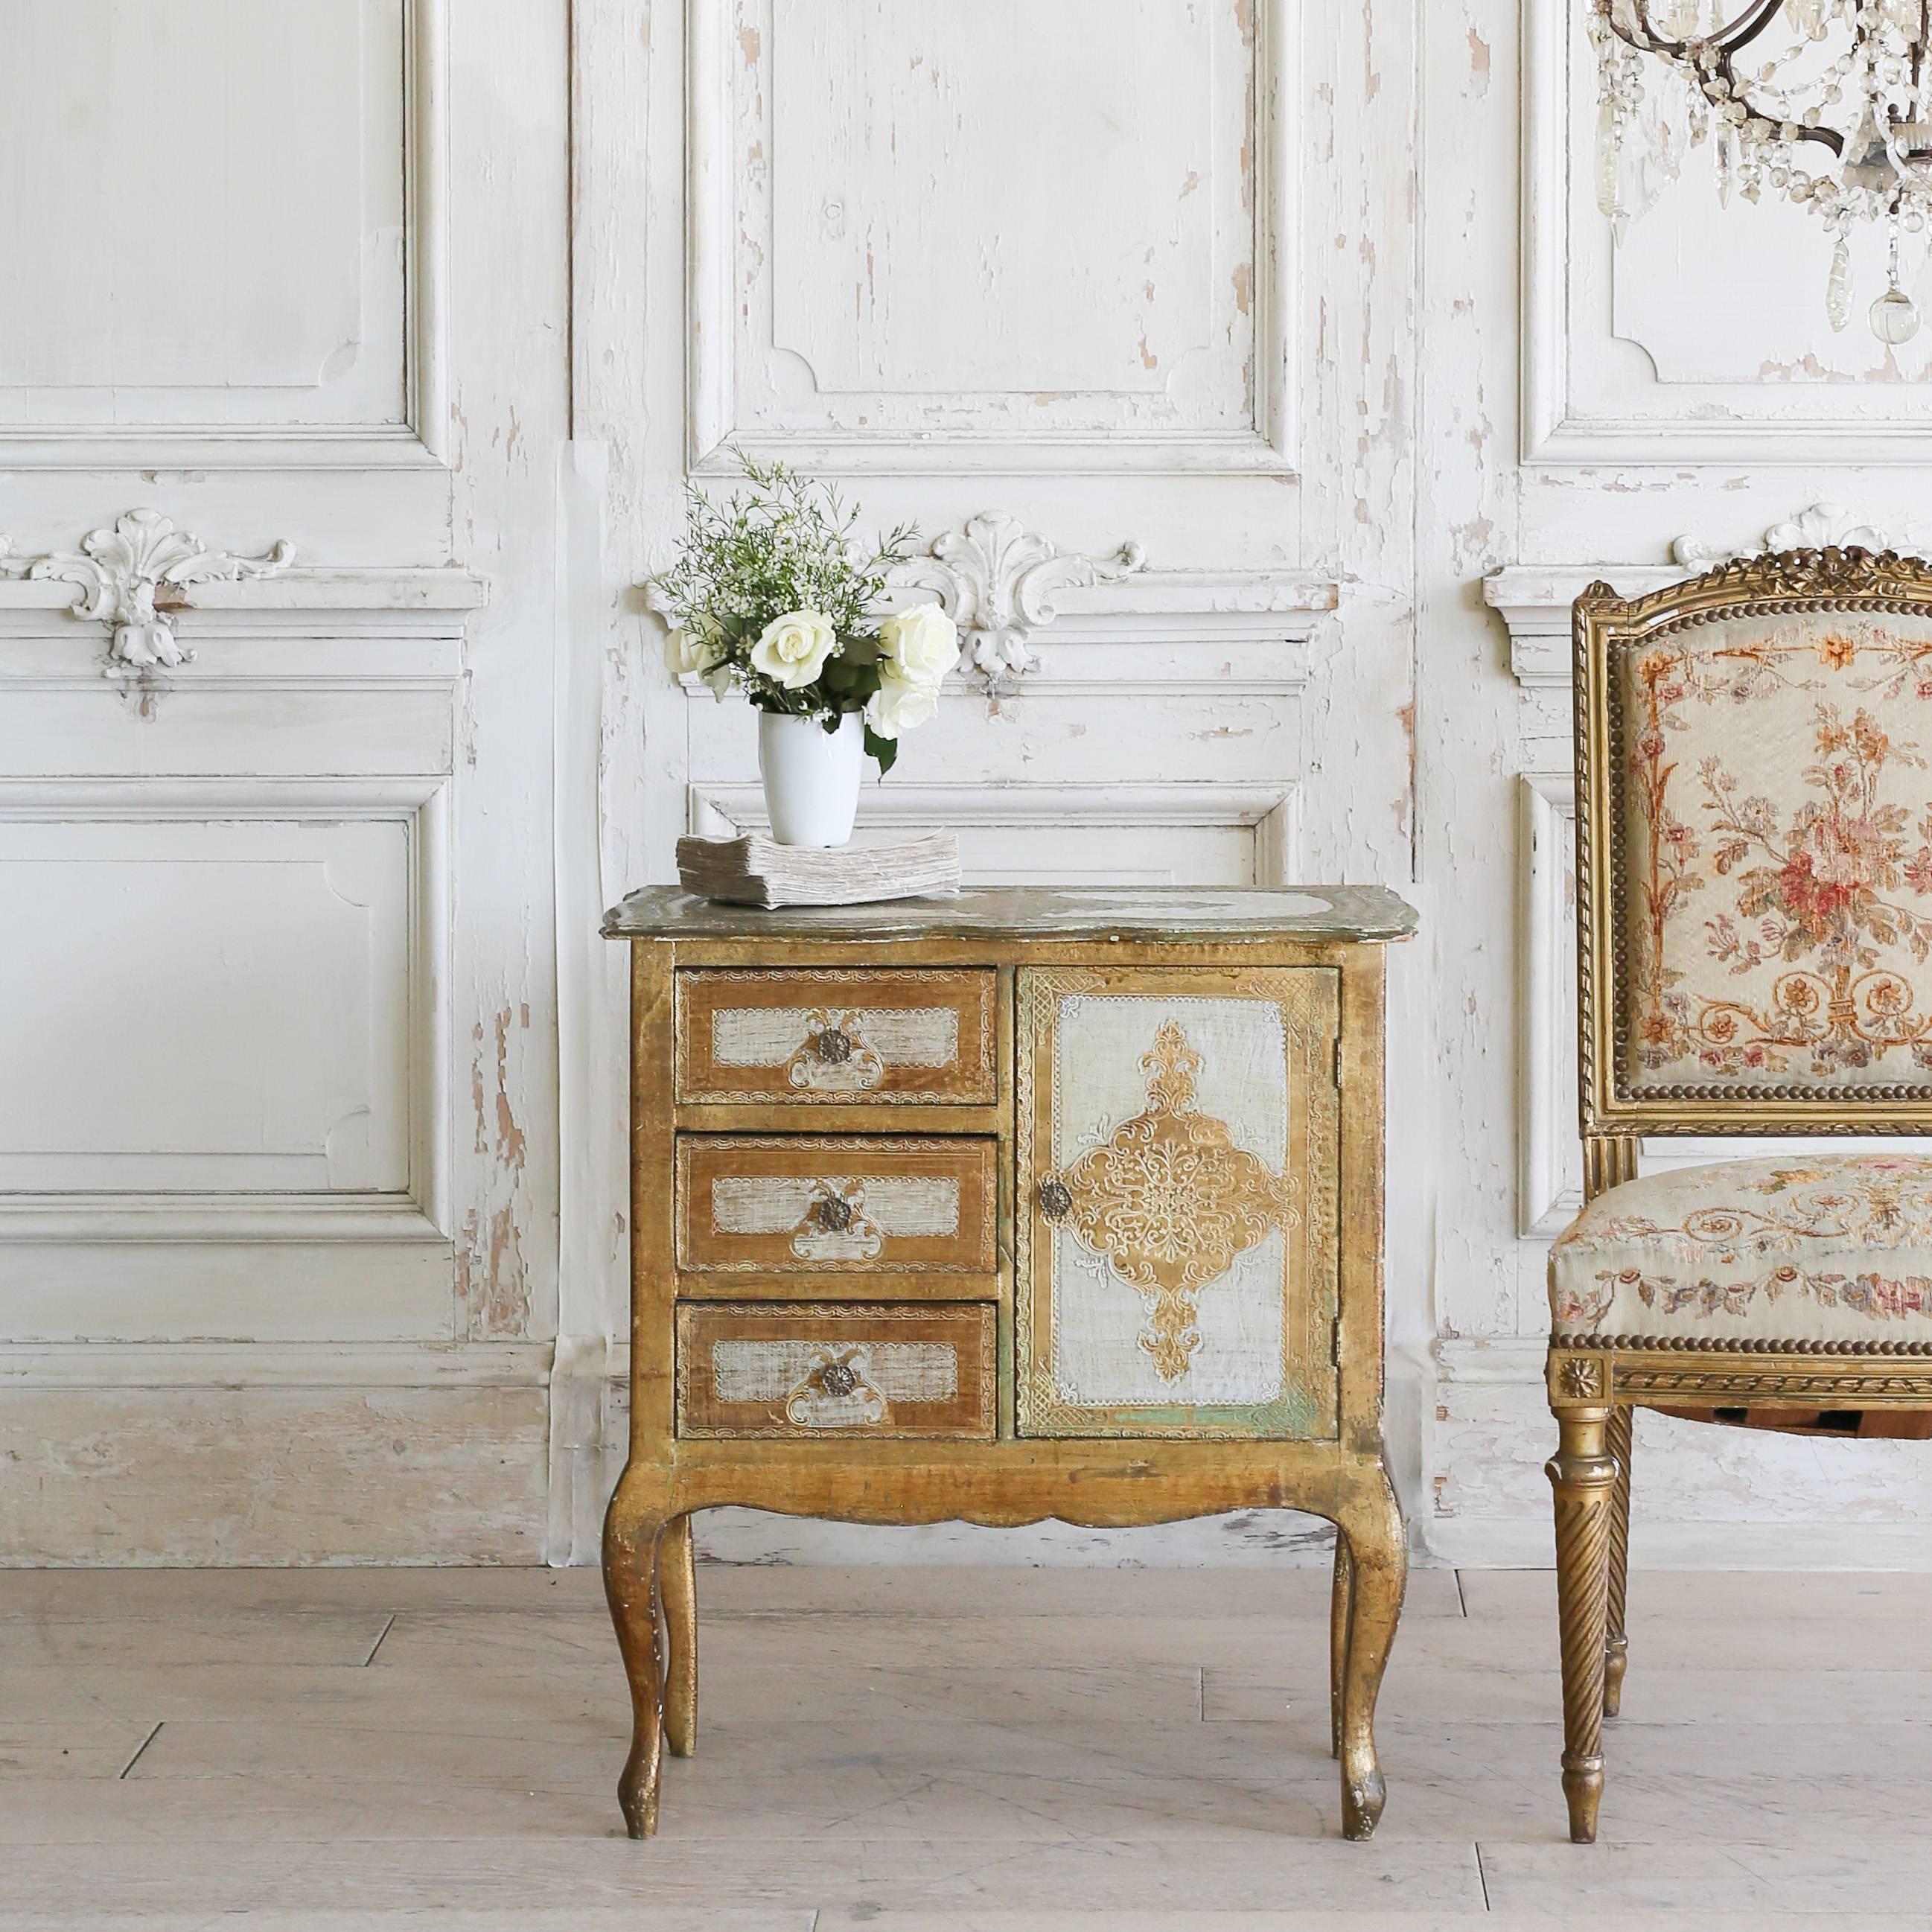 Charming nightstand with three drawers and a single cupboard. Gorgeous roomy piece in Classic Italian gilt and cream designs atop Louis XV style legs. A lovely piece for a bedroom or as storage in a bath suite.